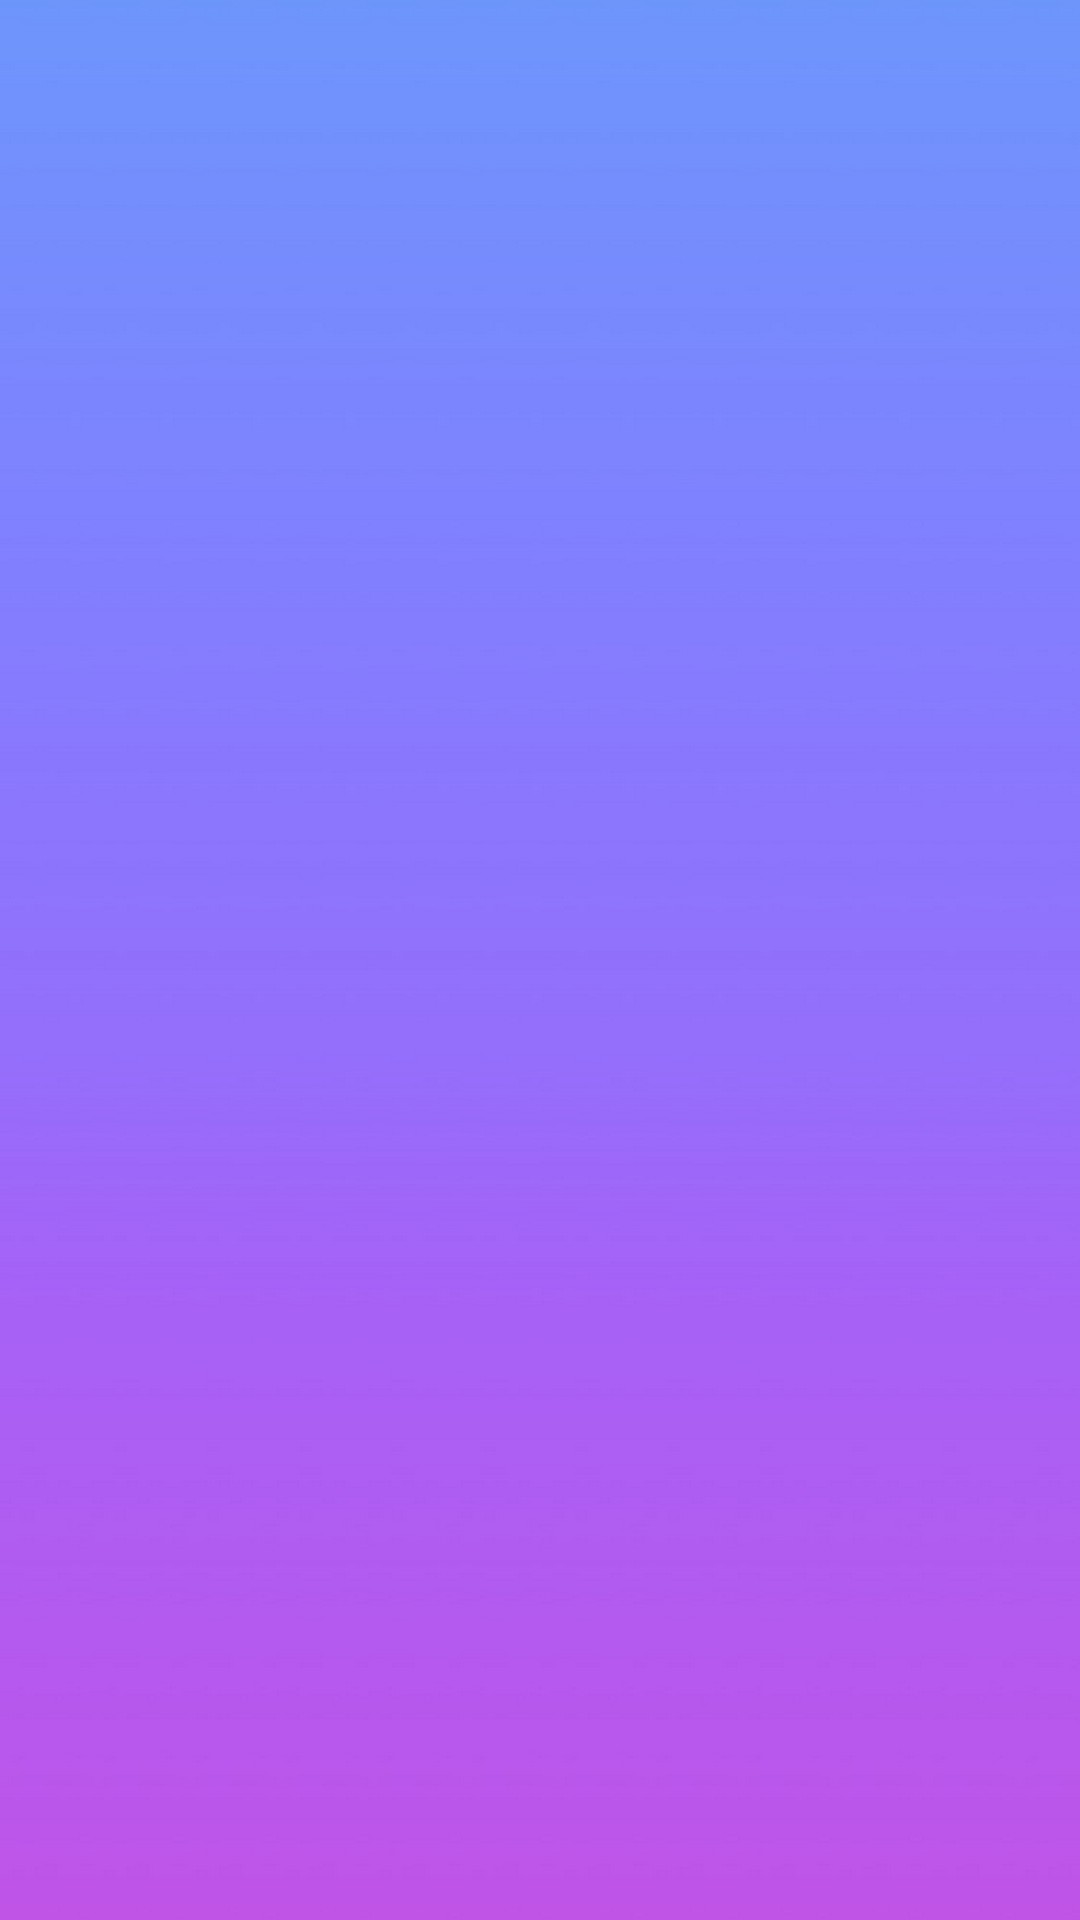 Gradient Wallpaper for iPhone with high-resolution 1080x1920 pixel. You can use this wallpaper for your iPhone 5, 6, 7, 8, X, XS, XR backgrounds, Mobile Screensaver, or iPad Lock Screen